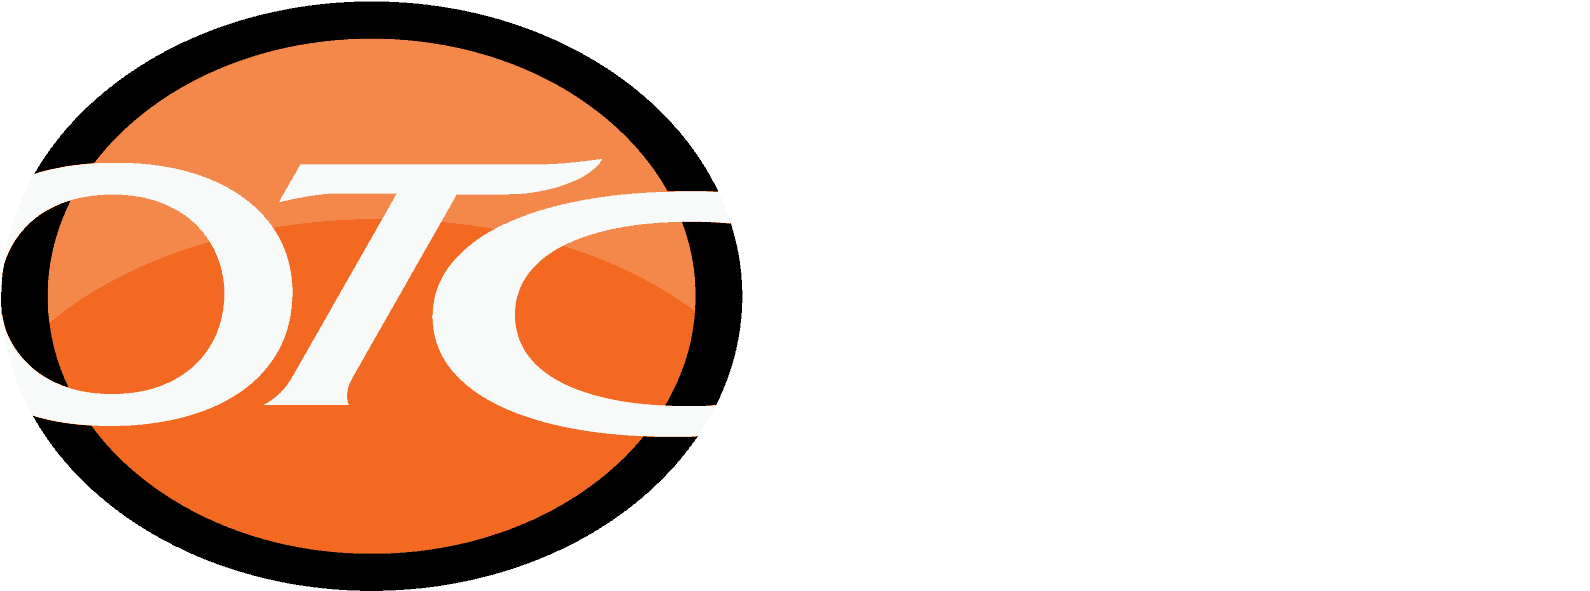 About Oklahoma Technical College - Oklahoma Technical College (1666x660), Png Download